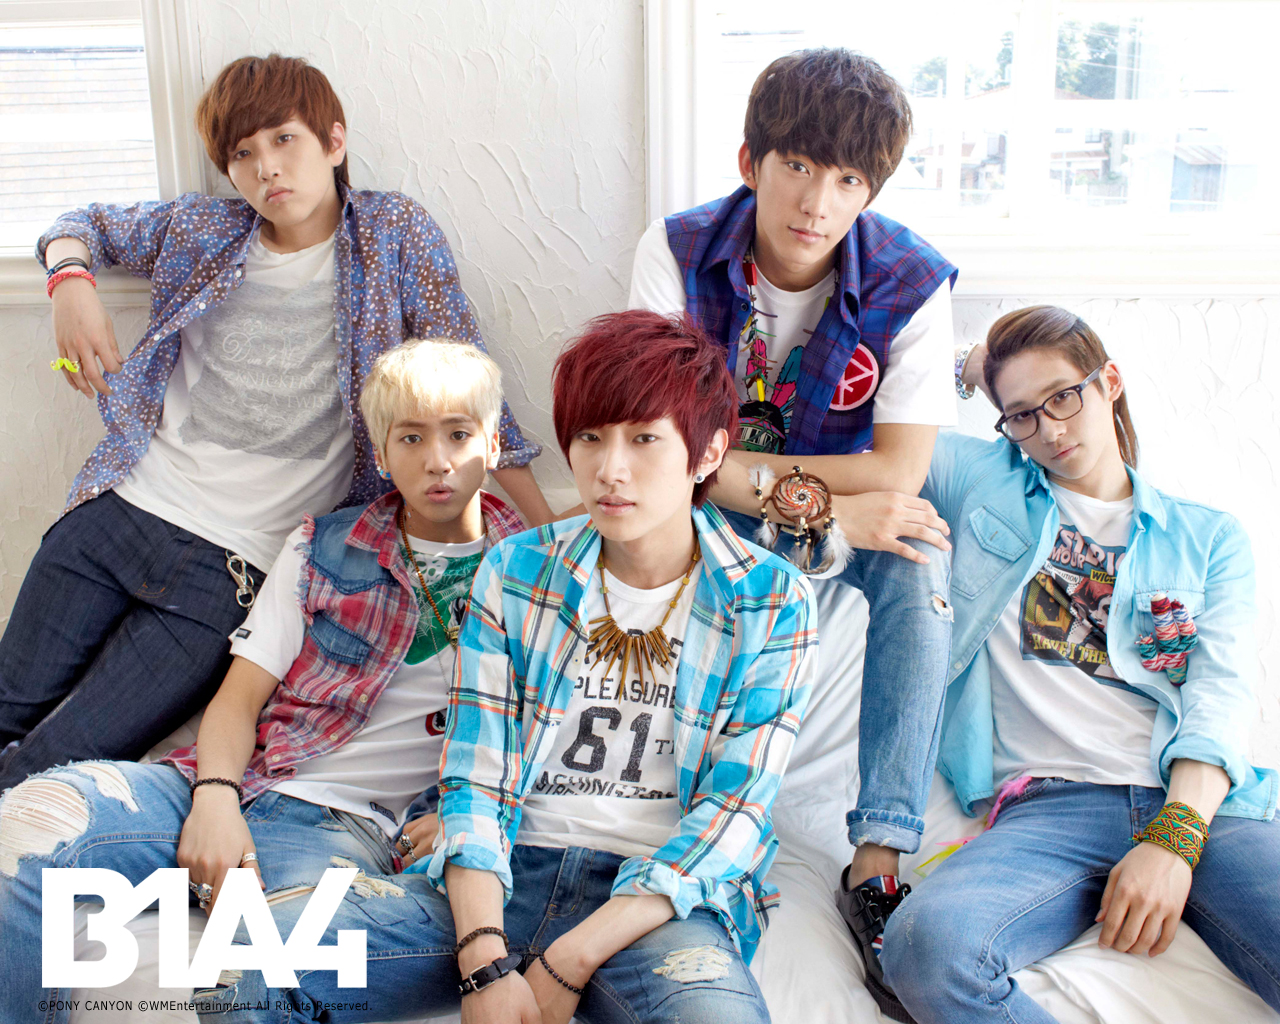 B1a4 Wallpapers Music Hq B1a4 Pictures 4k Wallpapers 19